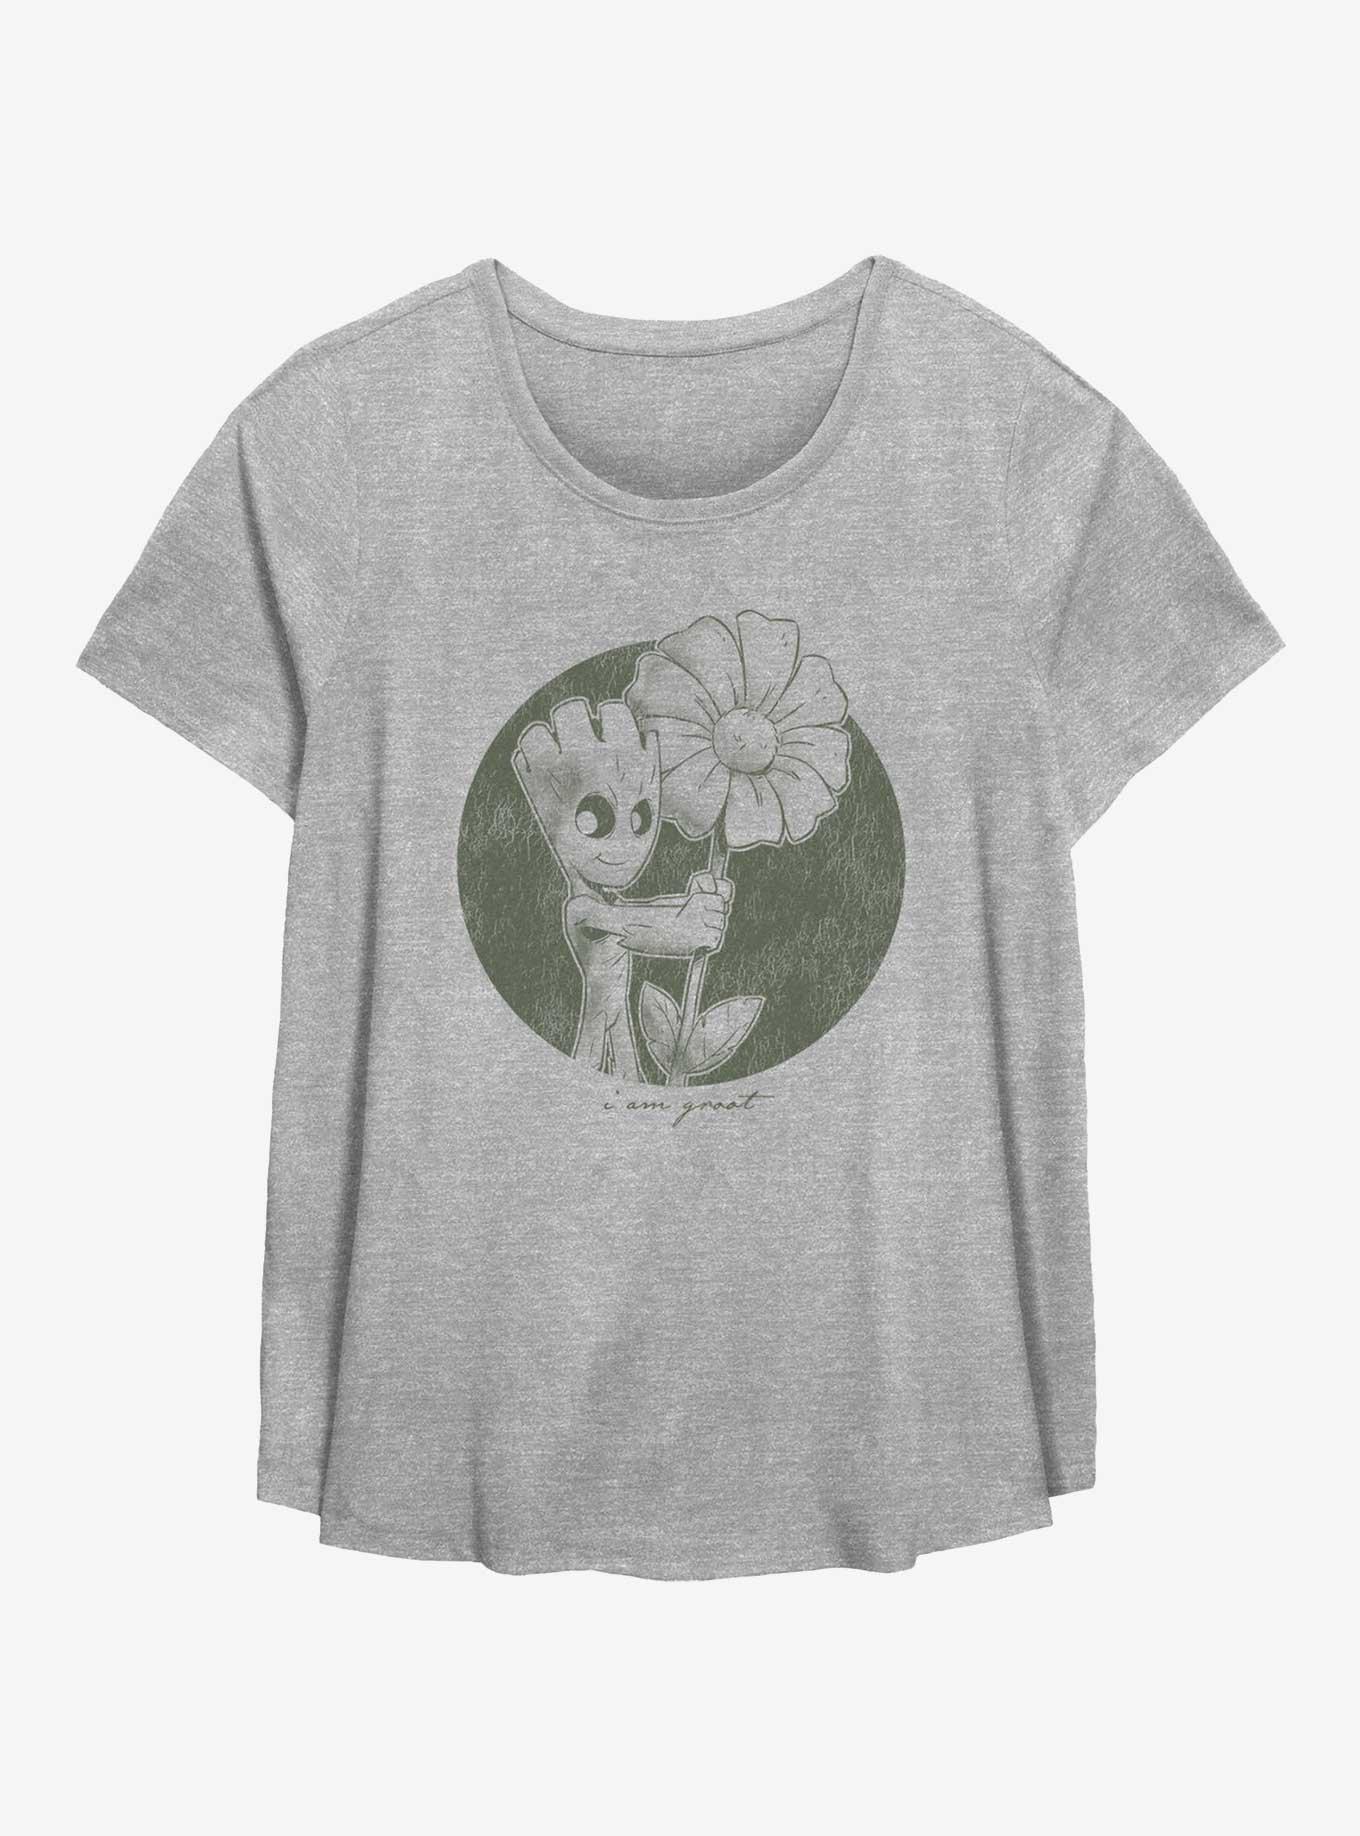 Marvel Guardians Of The Galaxy Groot Flower Girls T-Shirt Plus Size, HEATHER GR, hi-res